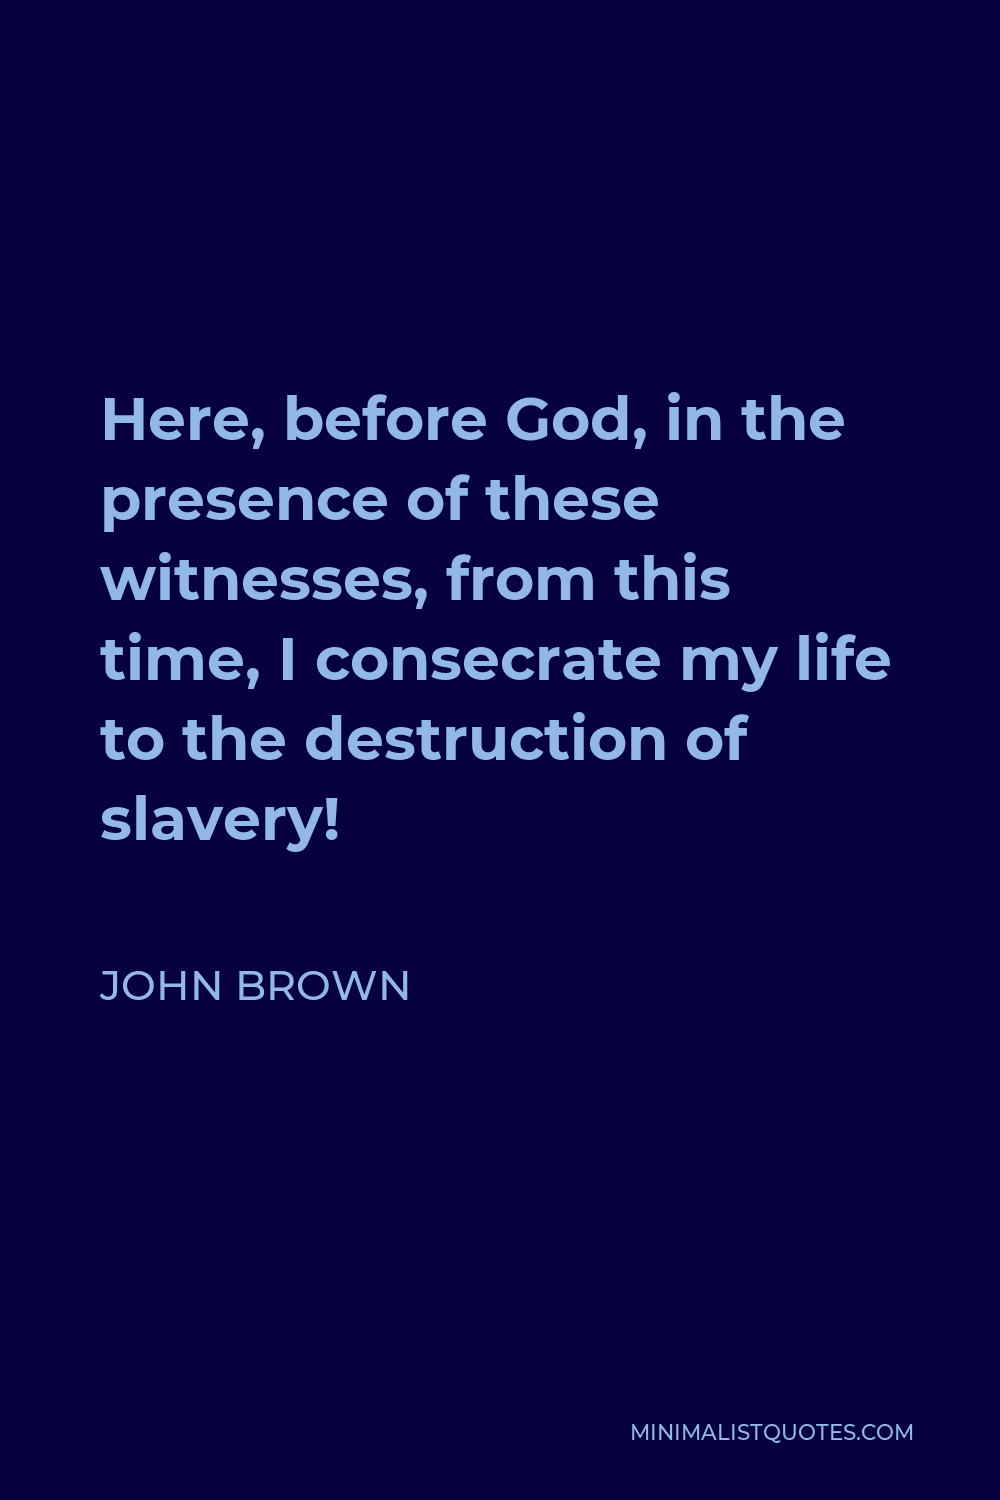 John Brown Quote - Here, before God, in the presence of these witnesses, from this time, I consecrate my life to the destruction of slavery!